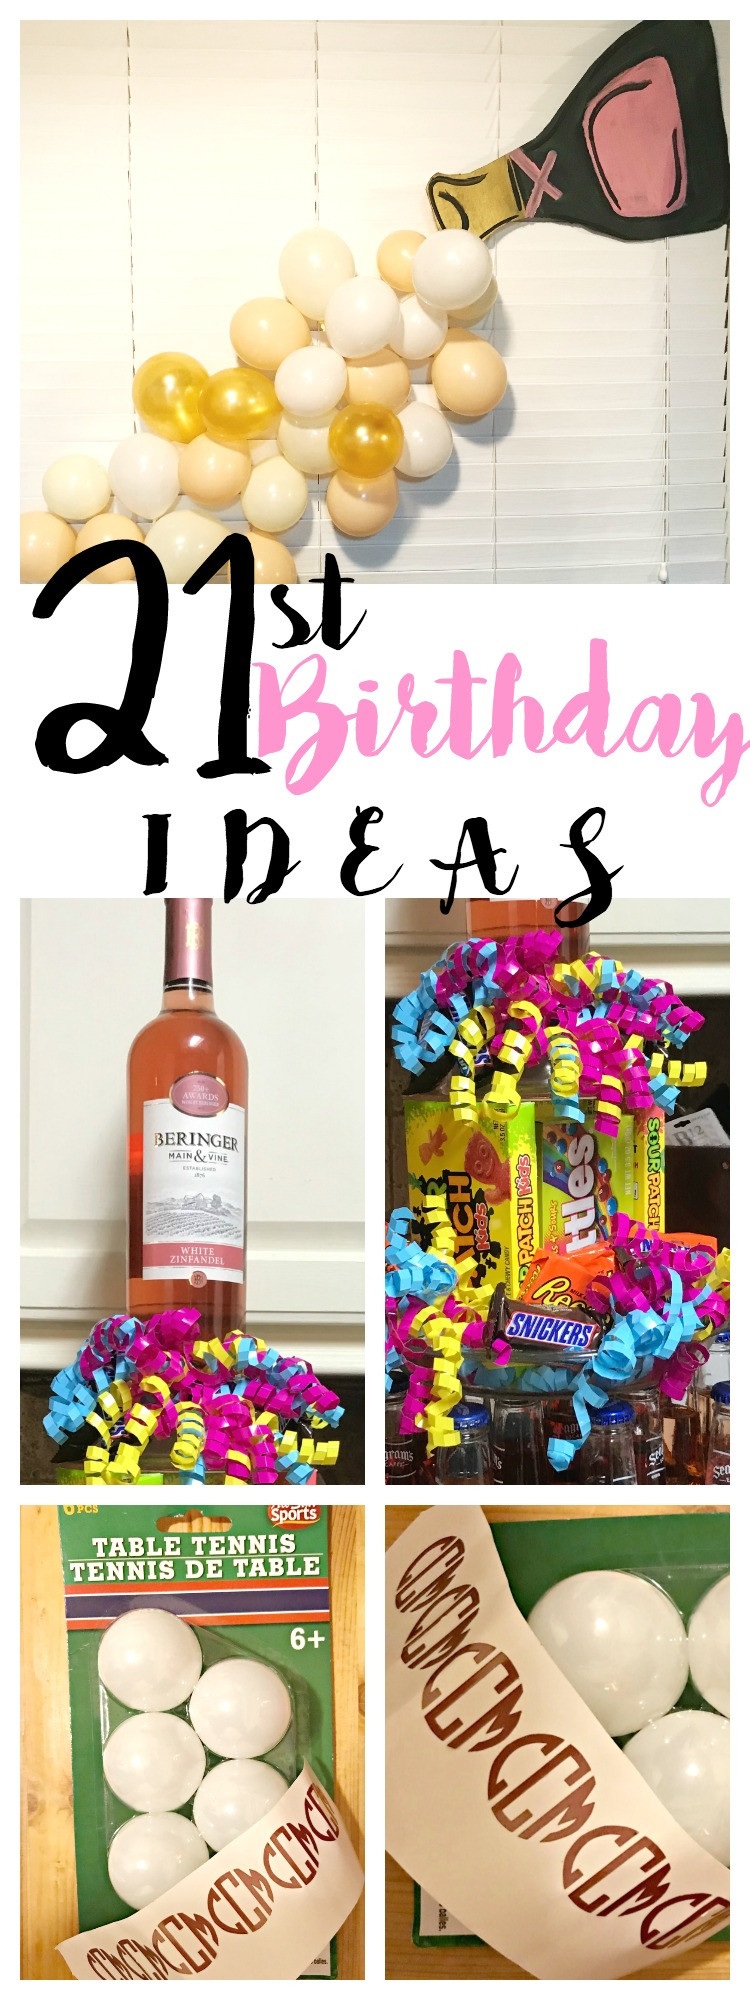 21st Birthday Decorations For Her
 21st Birthday Party Ideas